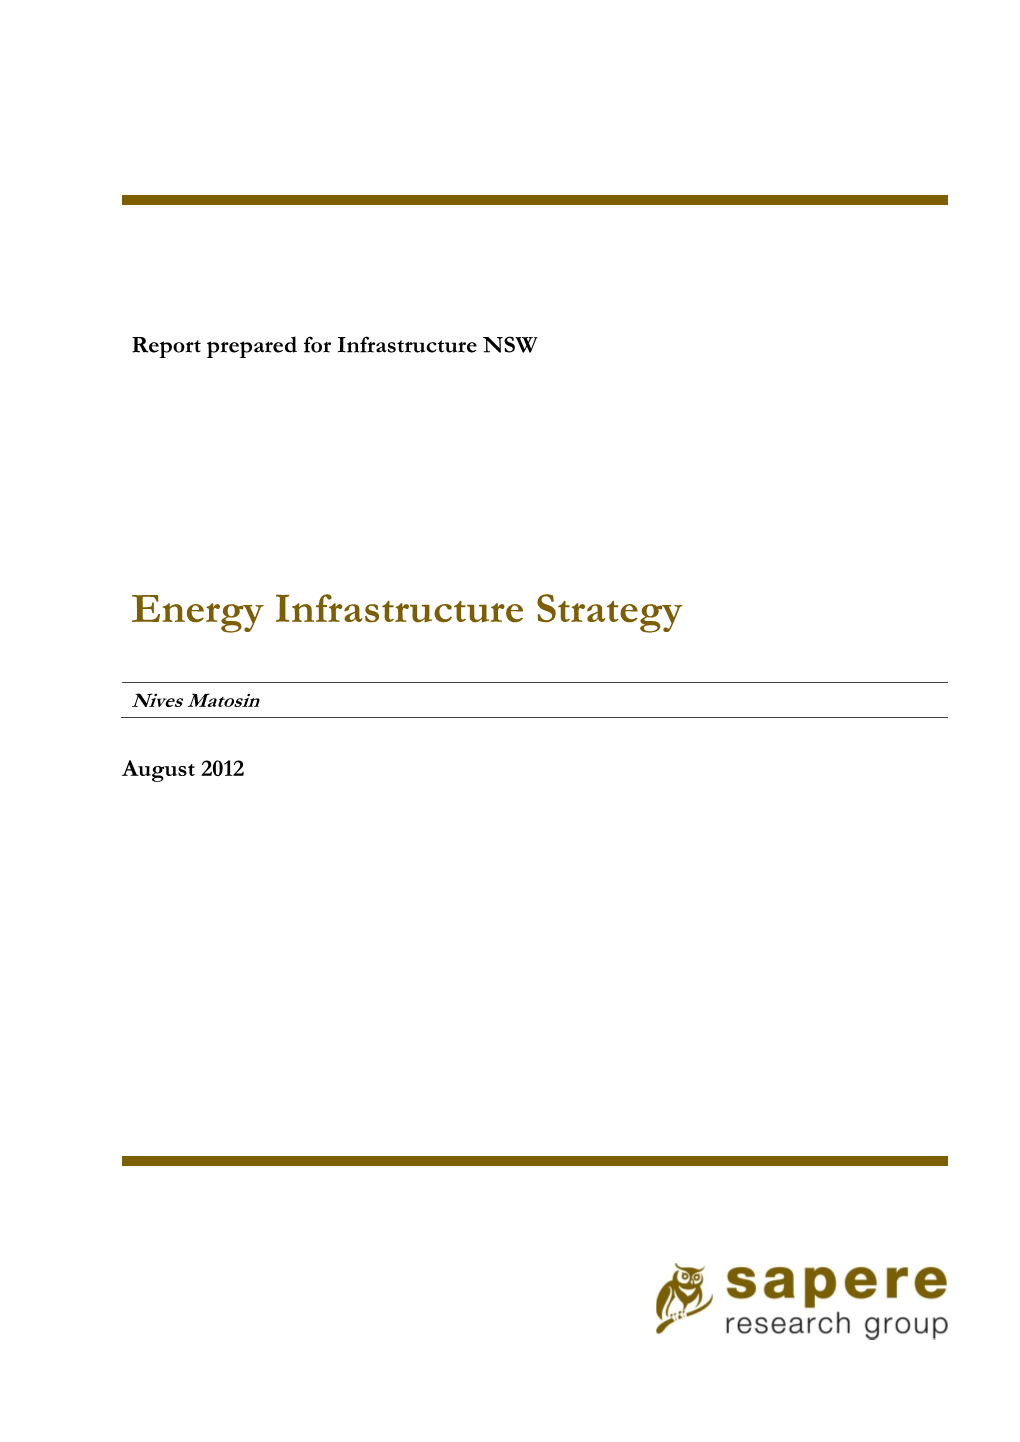 Energy Infrastructure Strategy August 2012